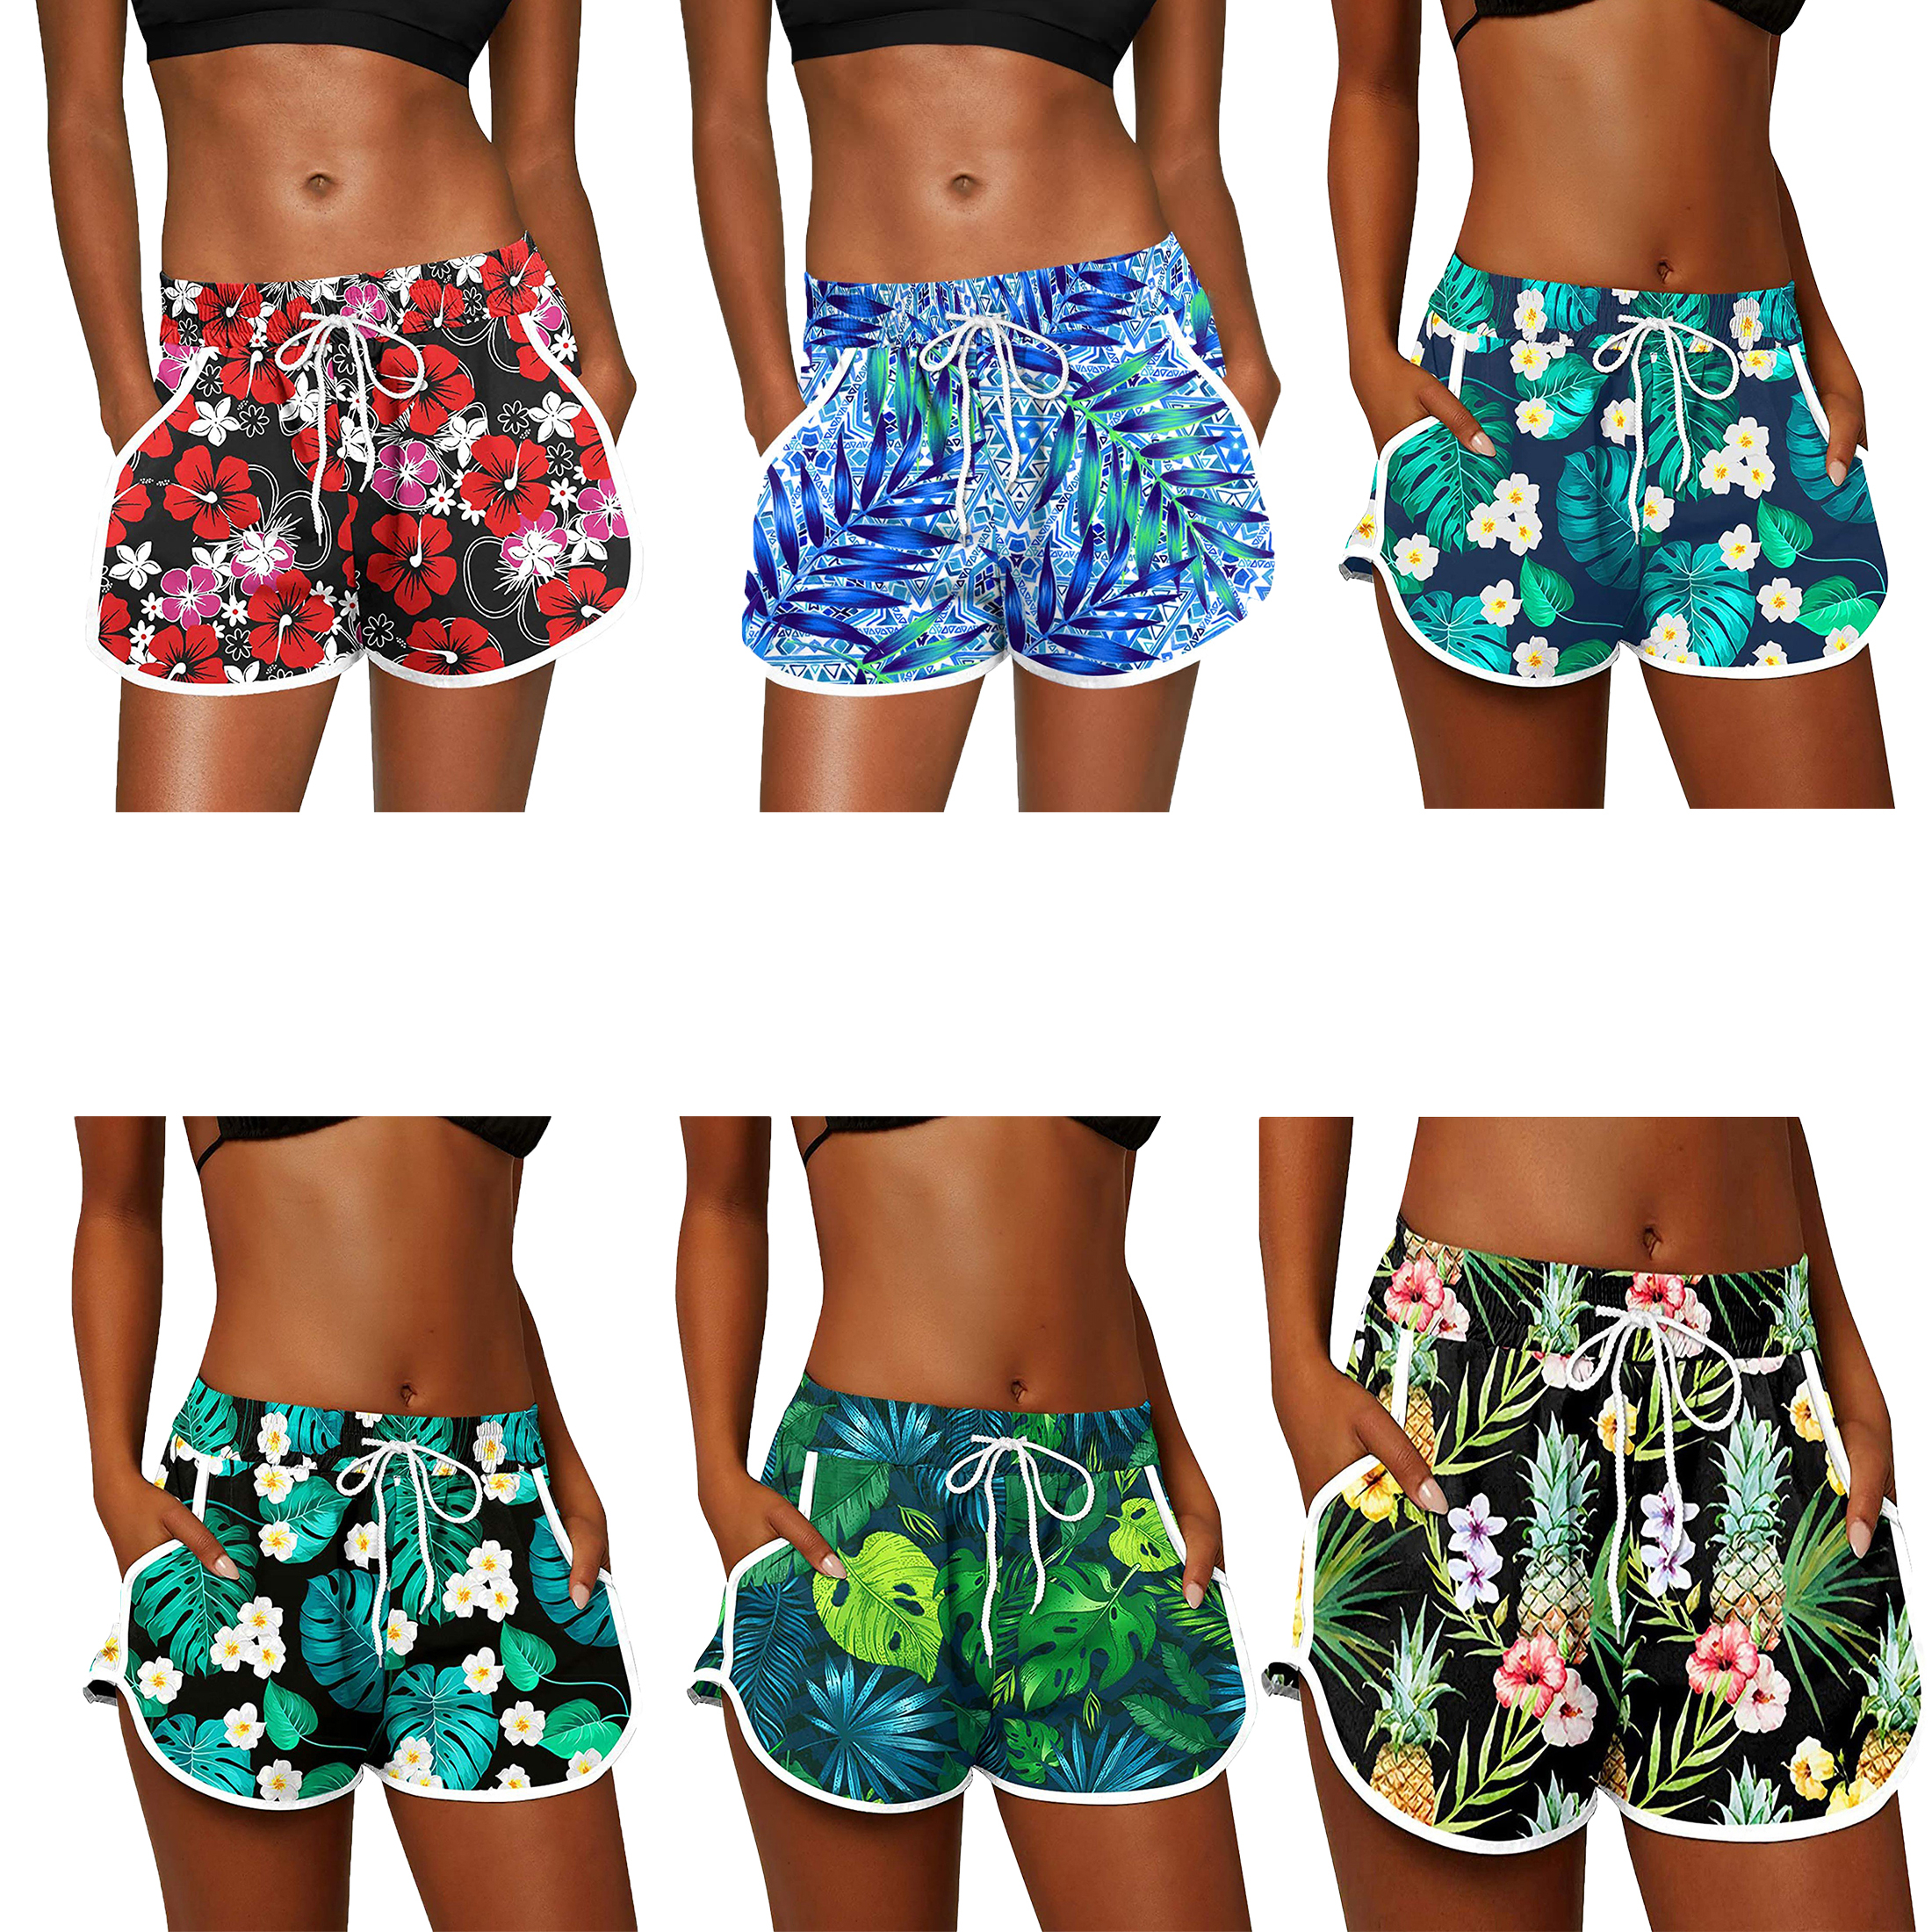 2-Pack Women's Floral Printed Shorts Elastic Waist Drawstring Summer Lounge Wear Pants Casual Dolphin Shorts With Pockets Quick Dry - XXL